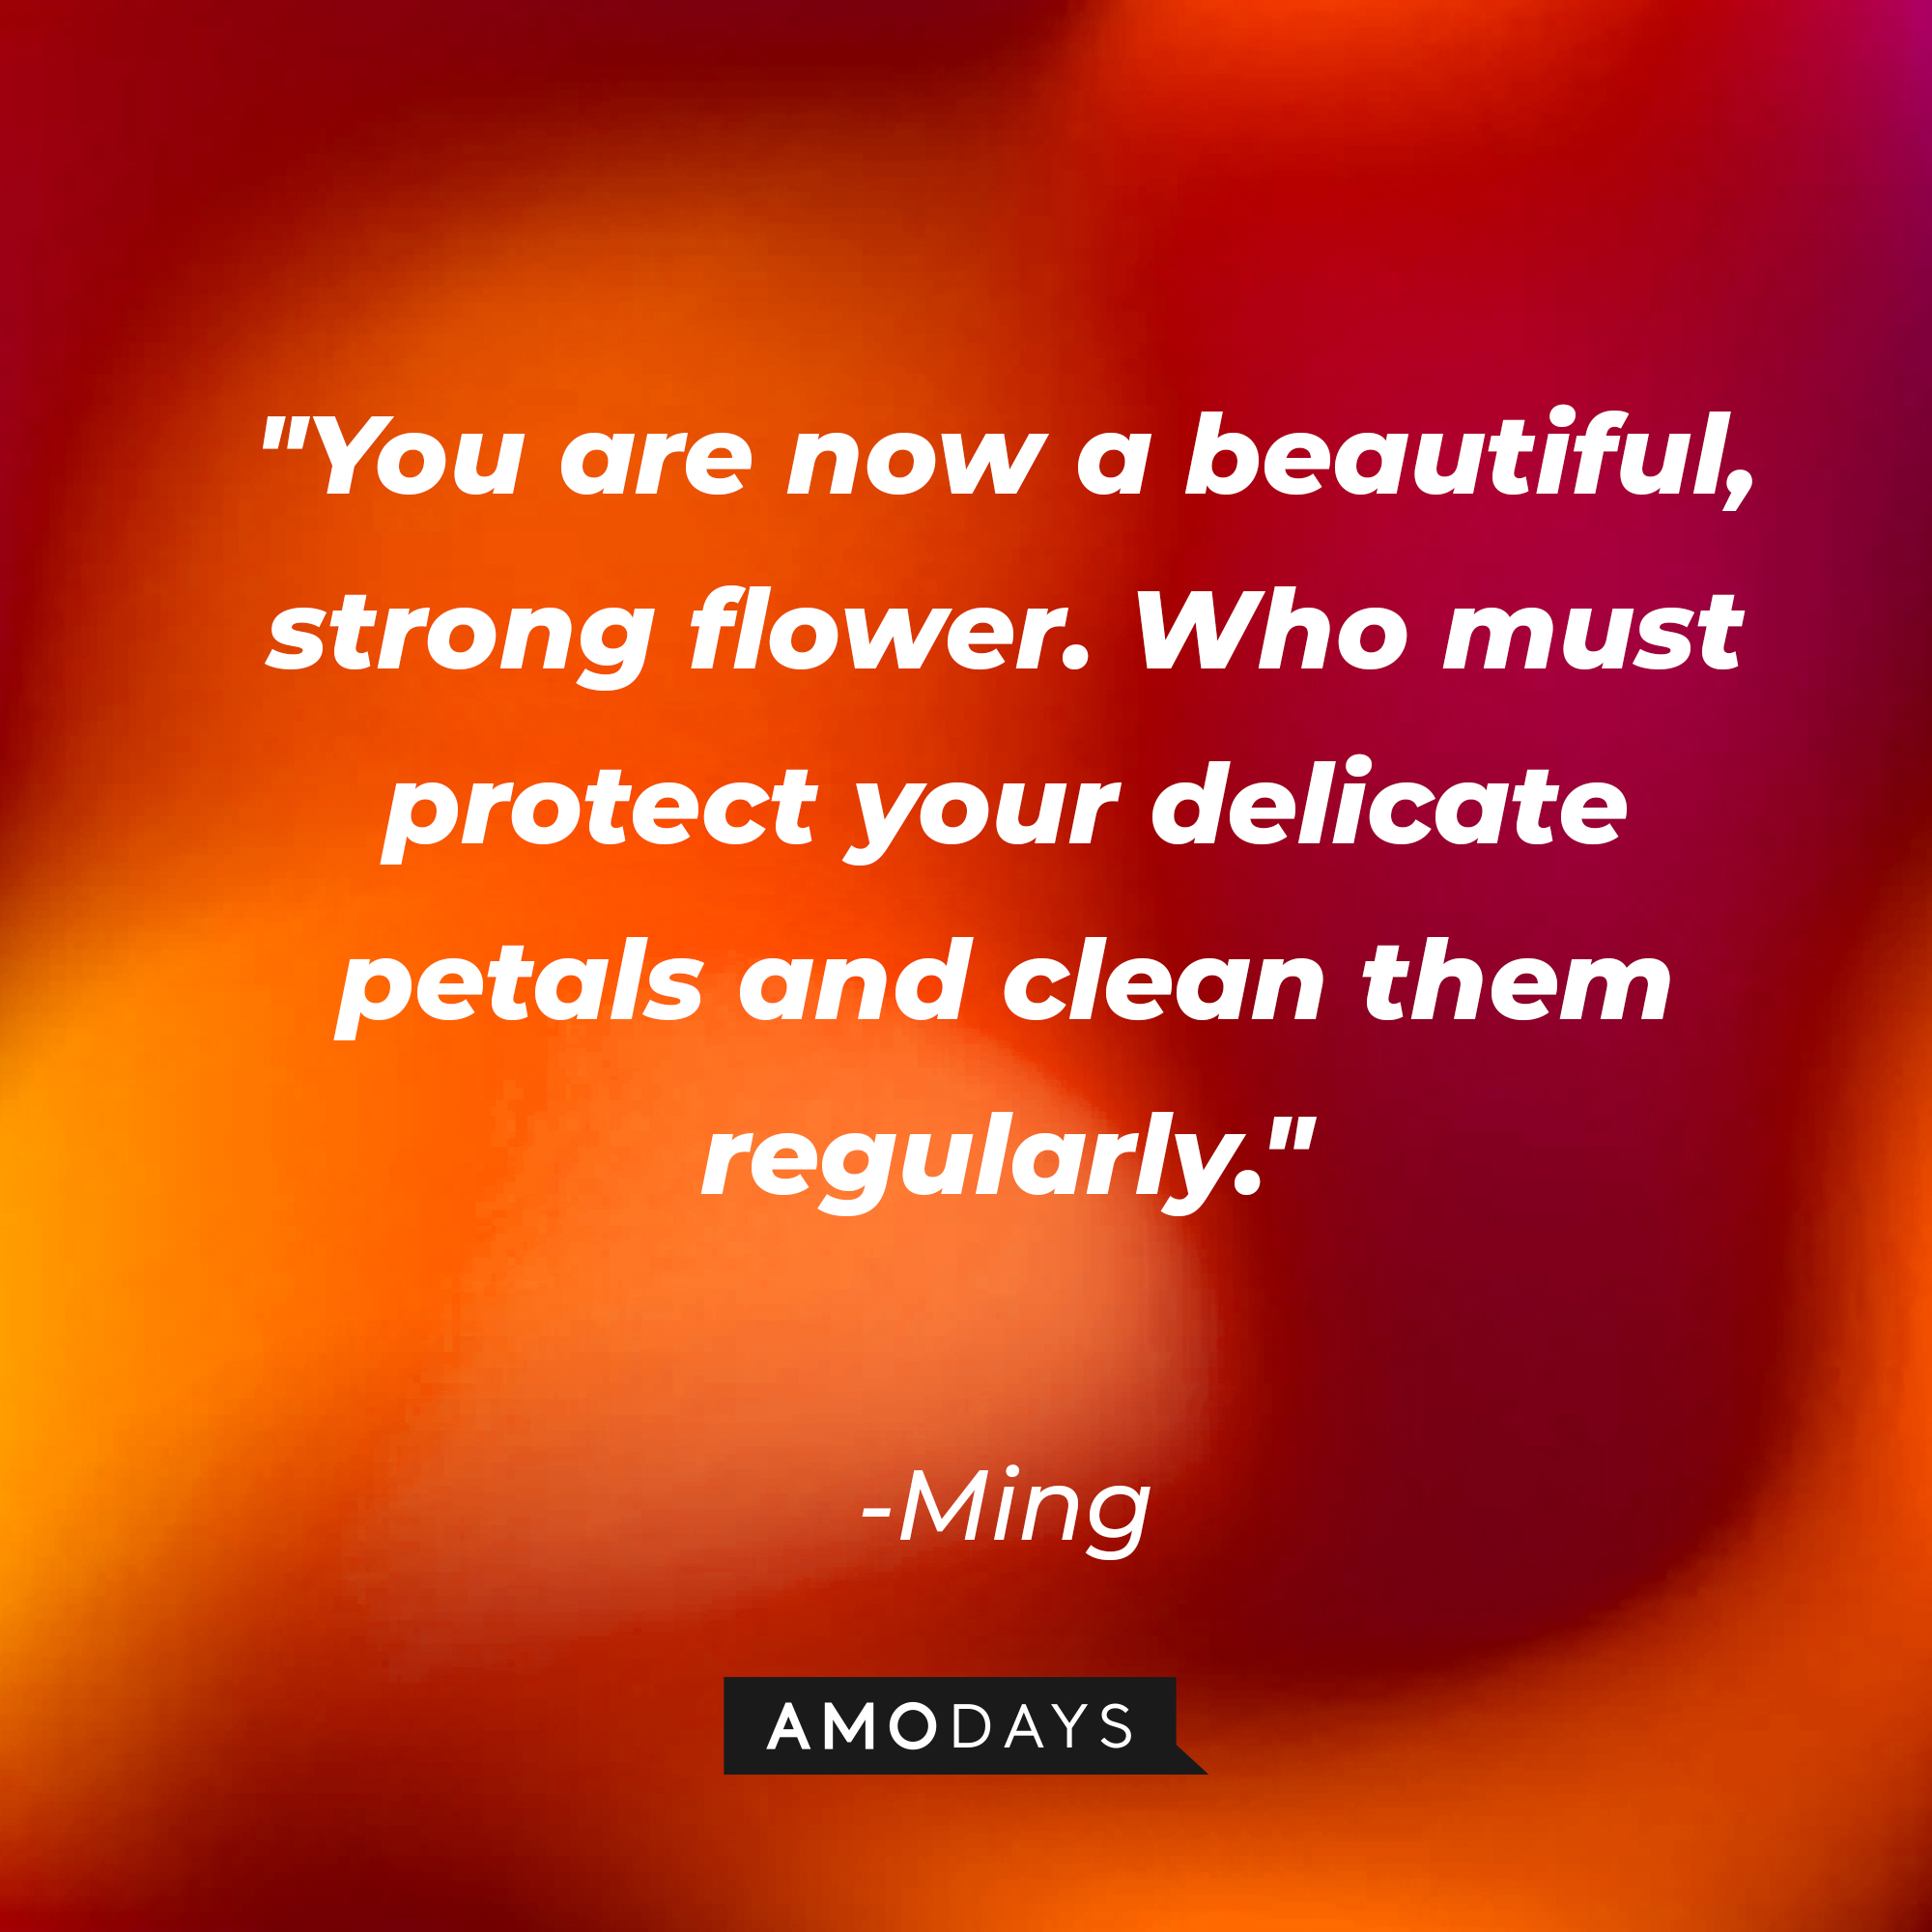 Ming's quote: "You are now a beautiful, strong flower. Who must protect your delicate petals and clean them regularly." | Source: AmoDays